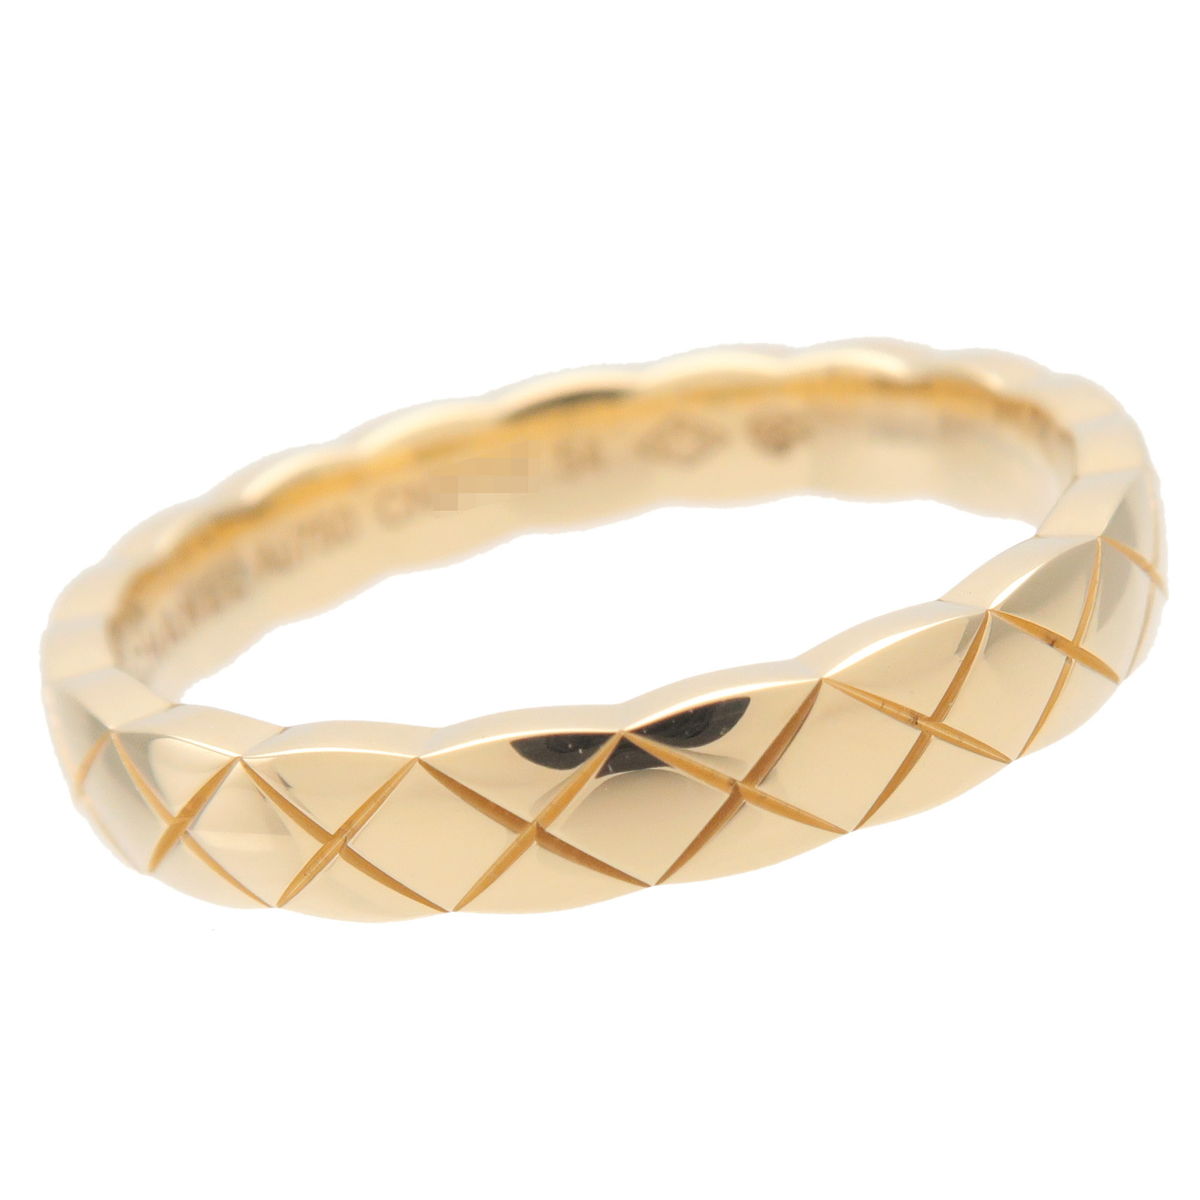 CHANEL-COCO-Crush-Mini-Ring-K18-750-Yellow-Gold-#54-US6.5-7-EU54 –  dct-ep_vintage luxury Store